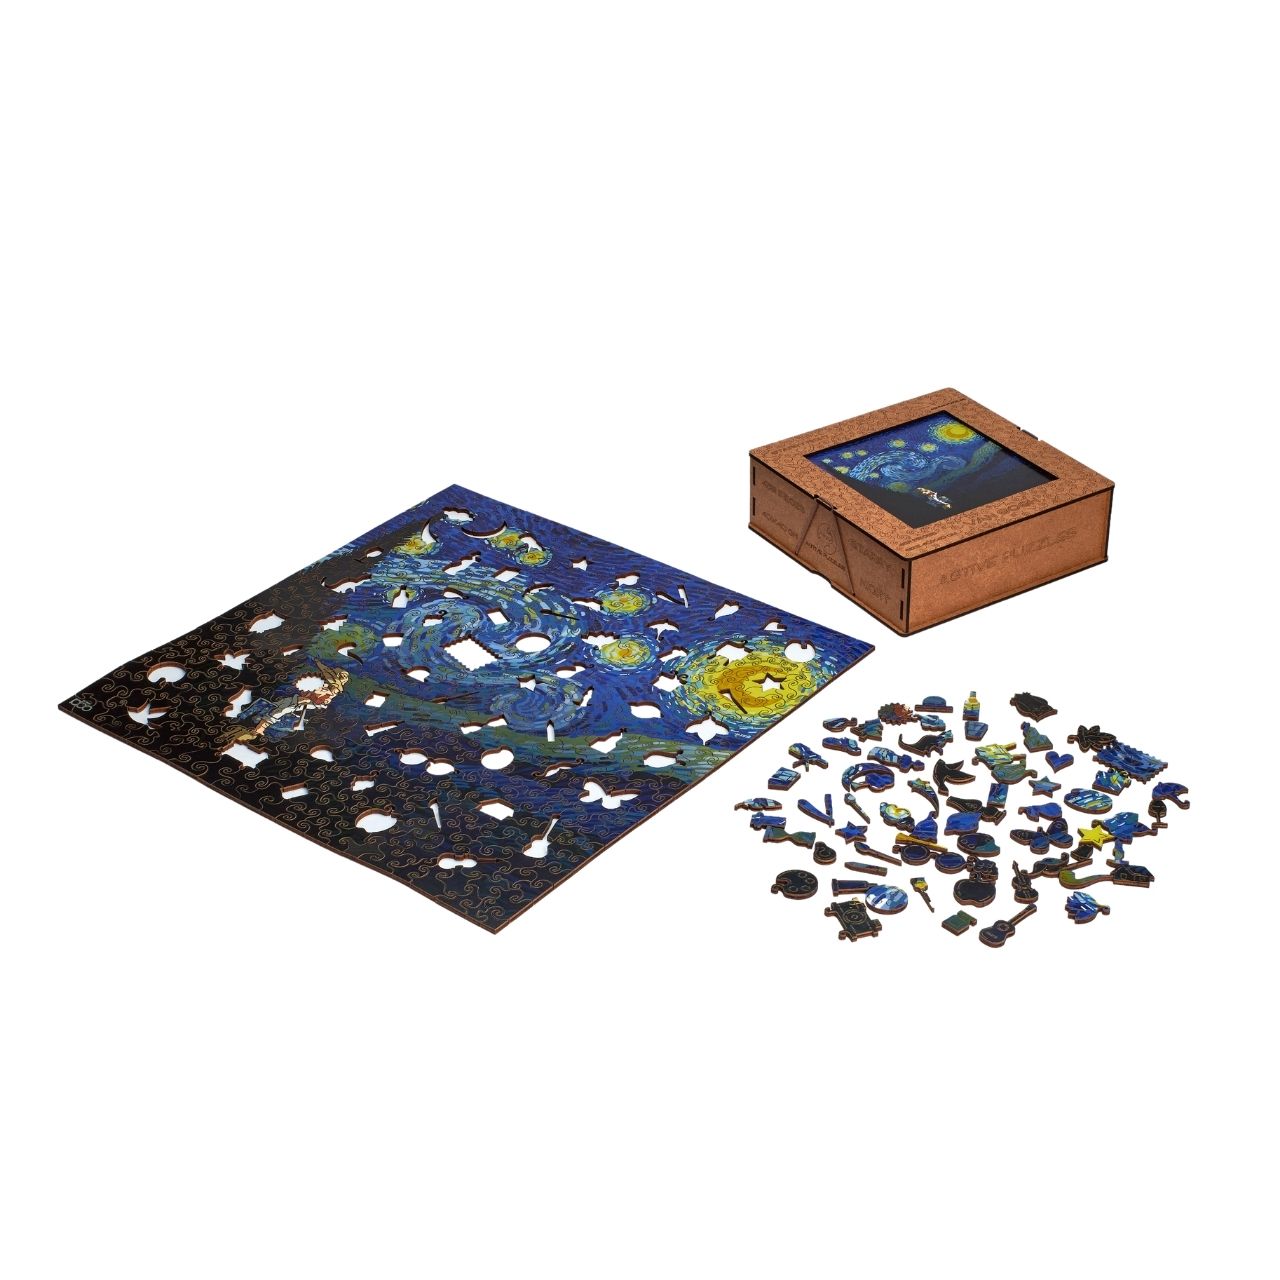 wooden puzzles board, box, and pieces